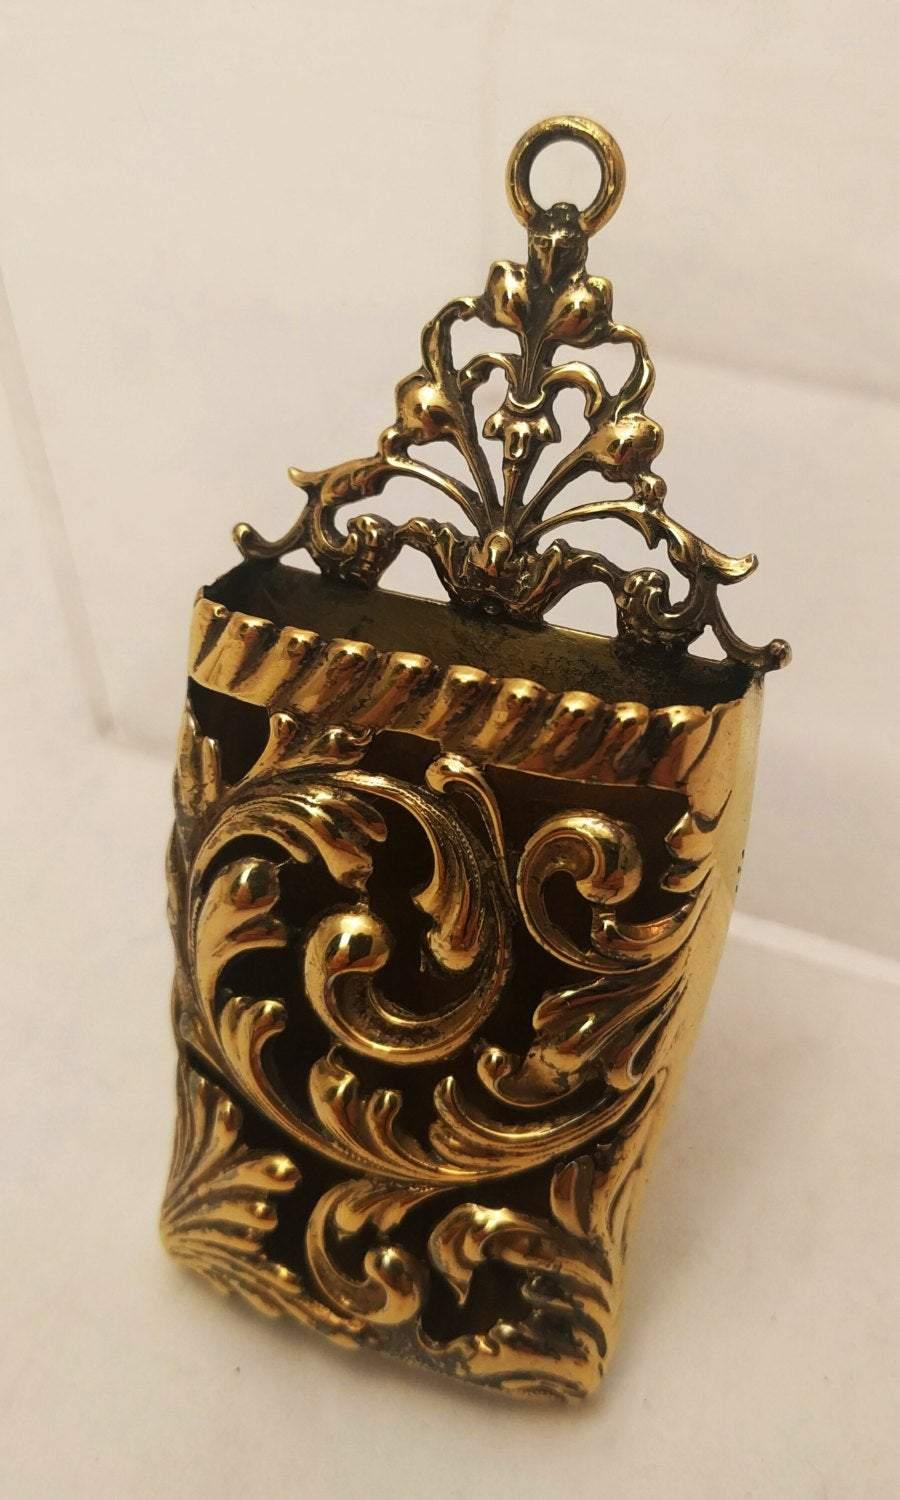 Exquisite Shiebler sterling silver match safe / vesta case in gold vermeil in beautiful leaf design from the late 19th / early 20th century. Rare hanging piece and striker on the bottom. Measuring 3.3 inches long and 1.5 inches wide. Hallmarked as